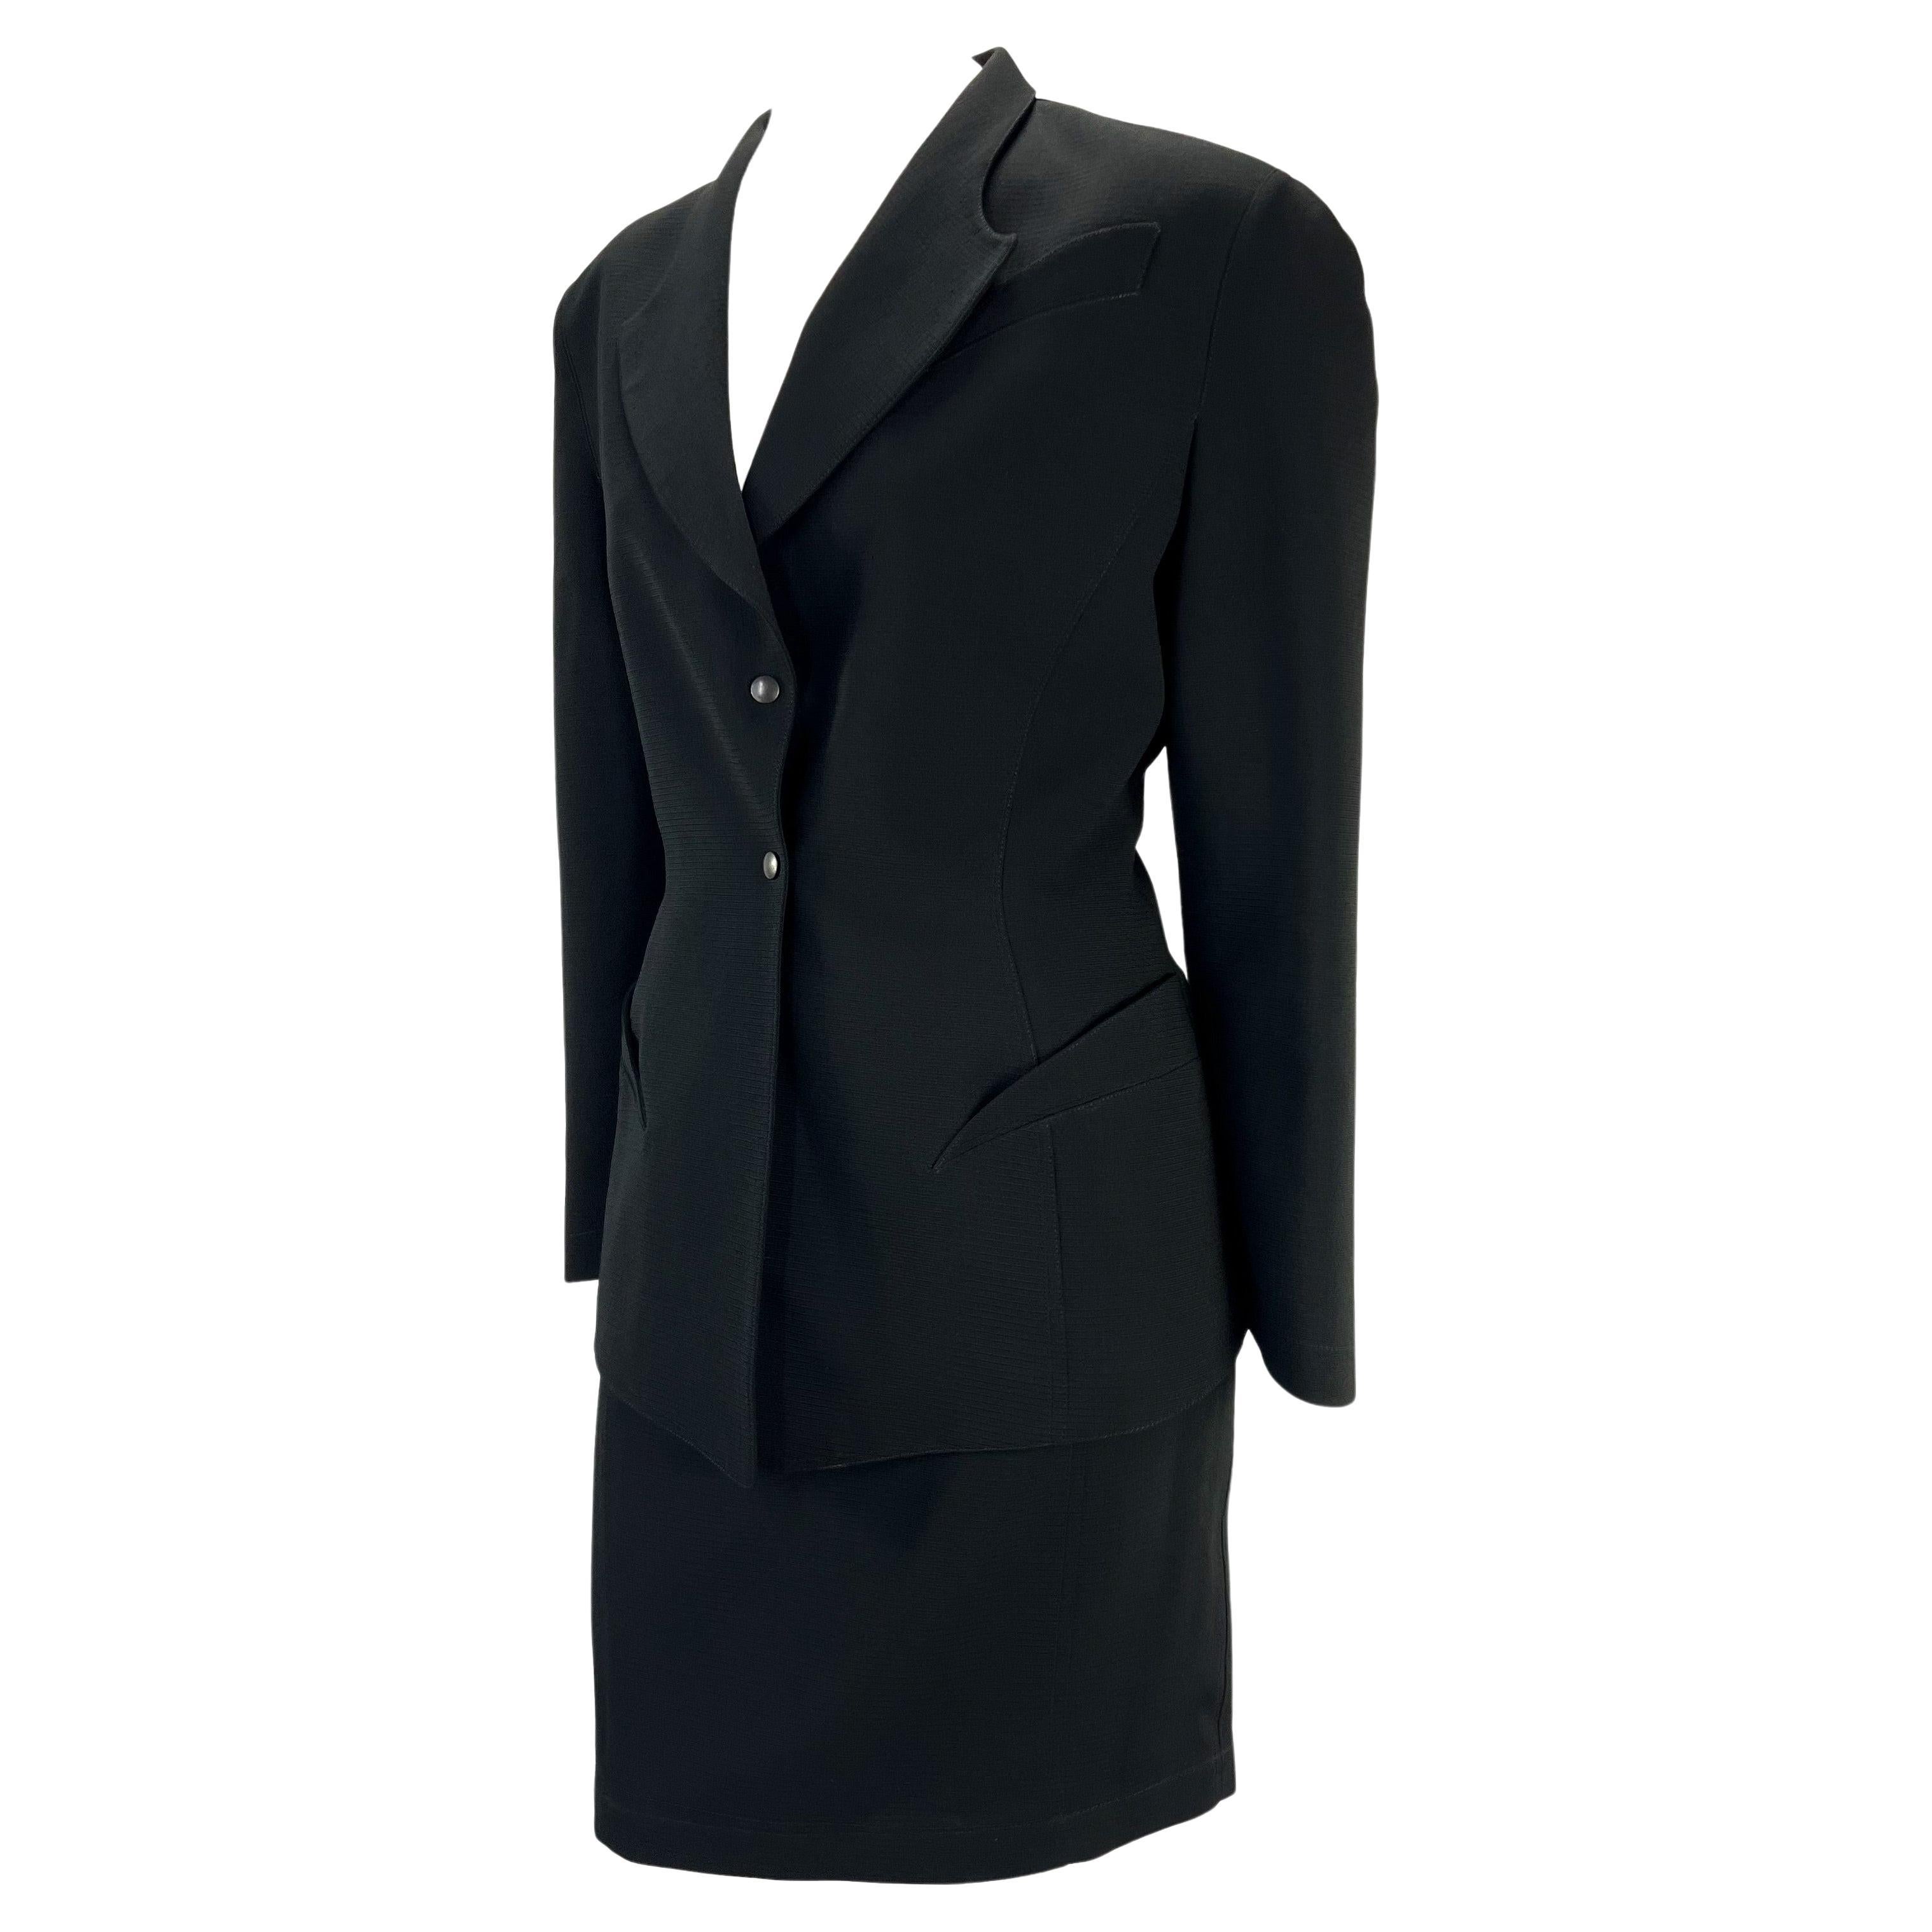 Presenting a sculptural black Thierry Mugler skirt suit, designed by Manfred Mugler. From the 1980s, this suit features masterful design and tailoring. The blazer features sculptural curved faux pockets which extenuate the hips. Both the skirt and